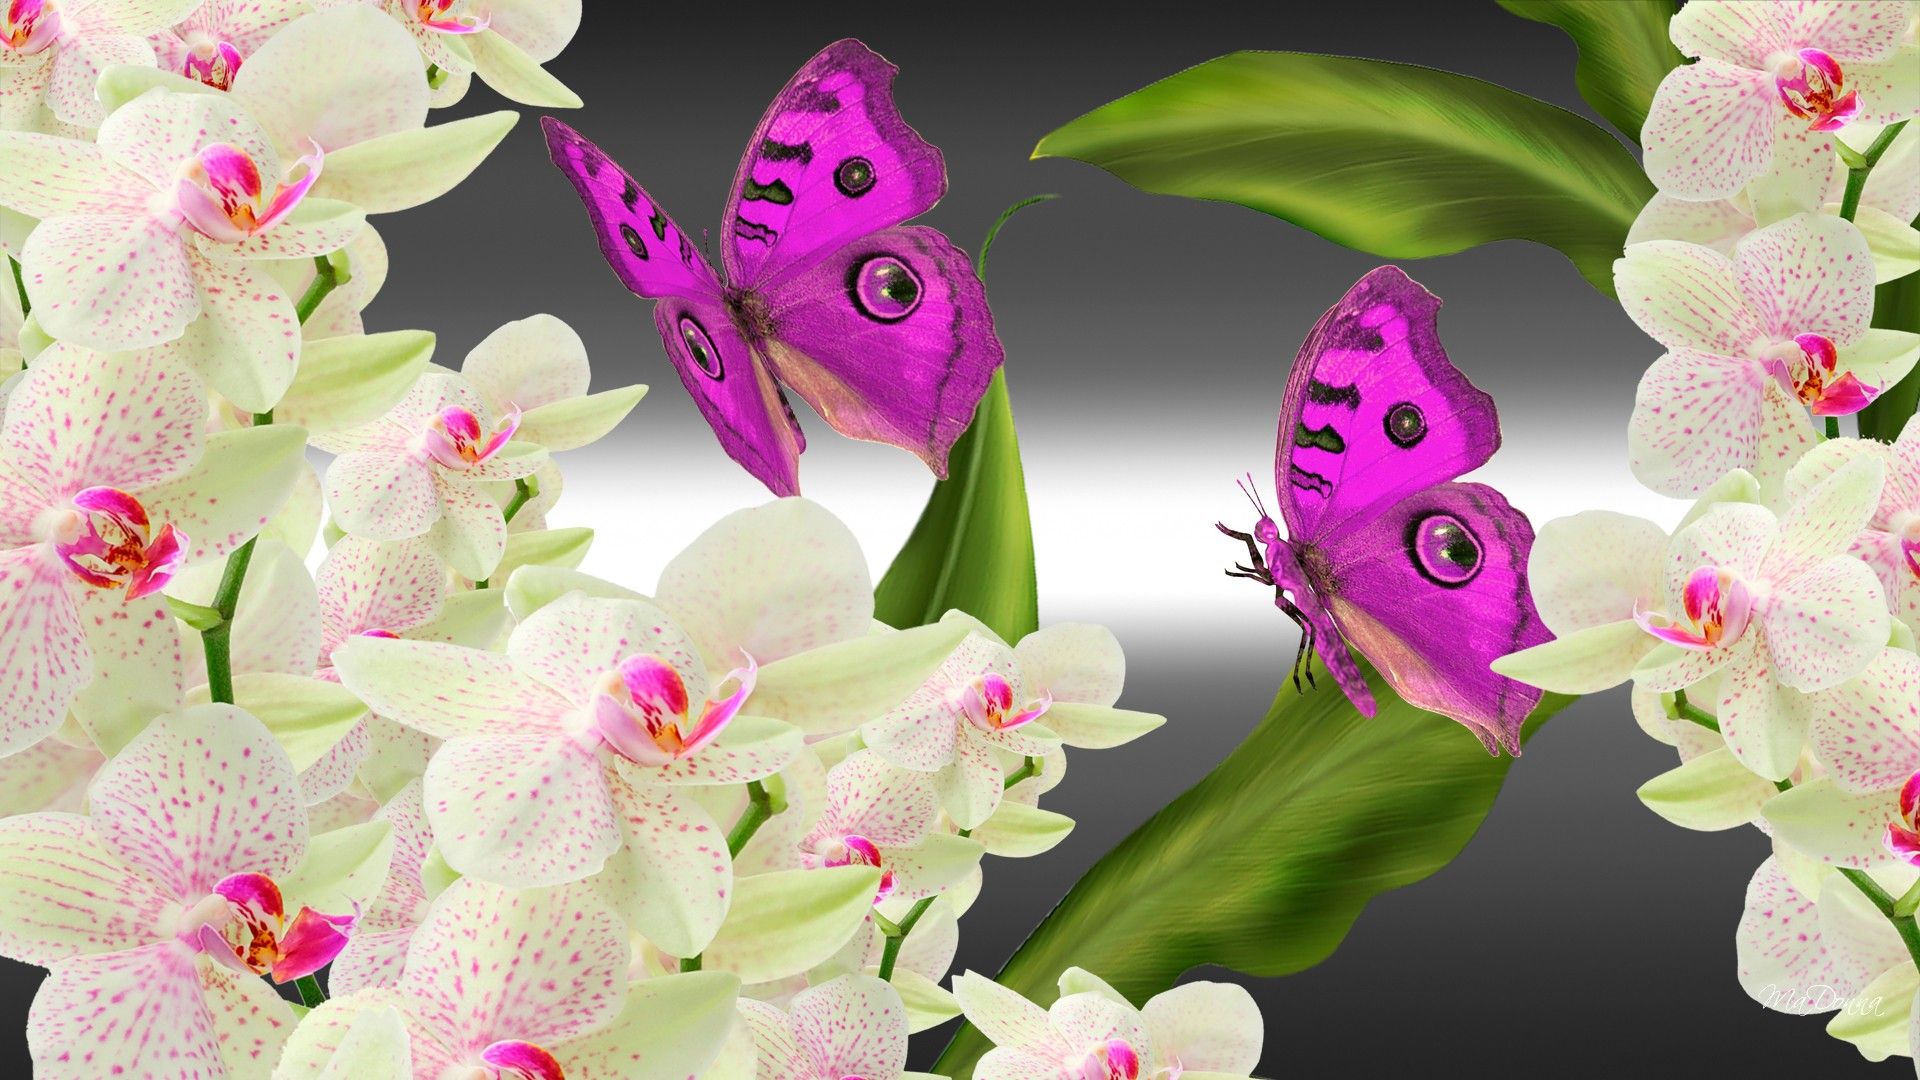 Orchids and Butterflies by MaDonna